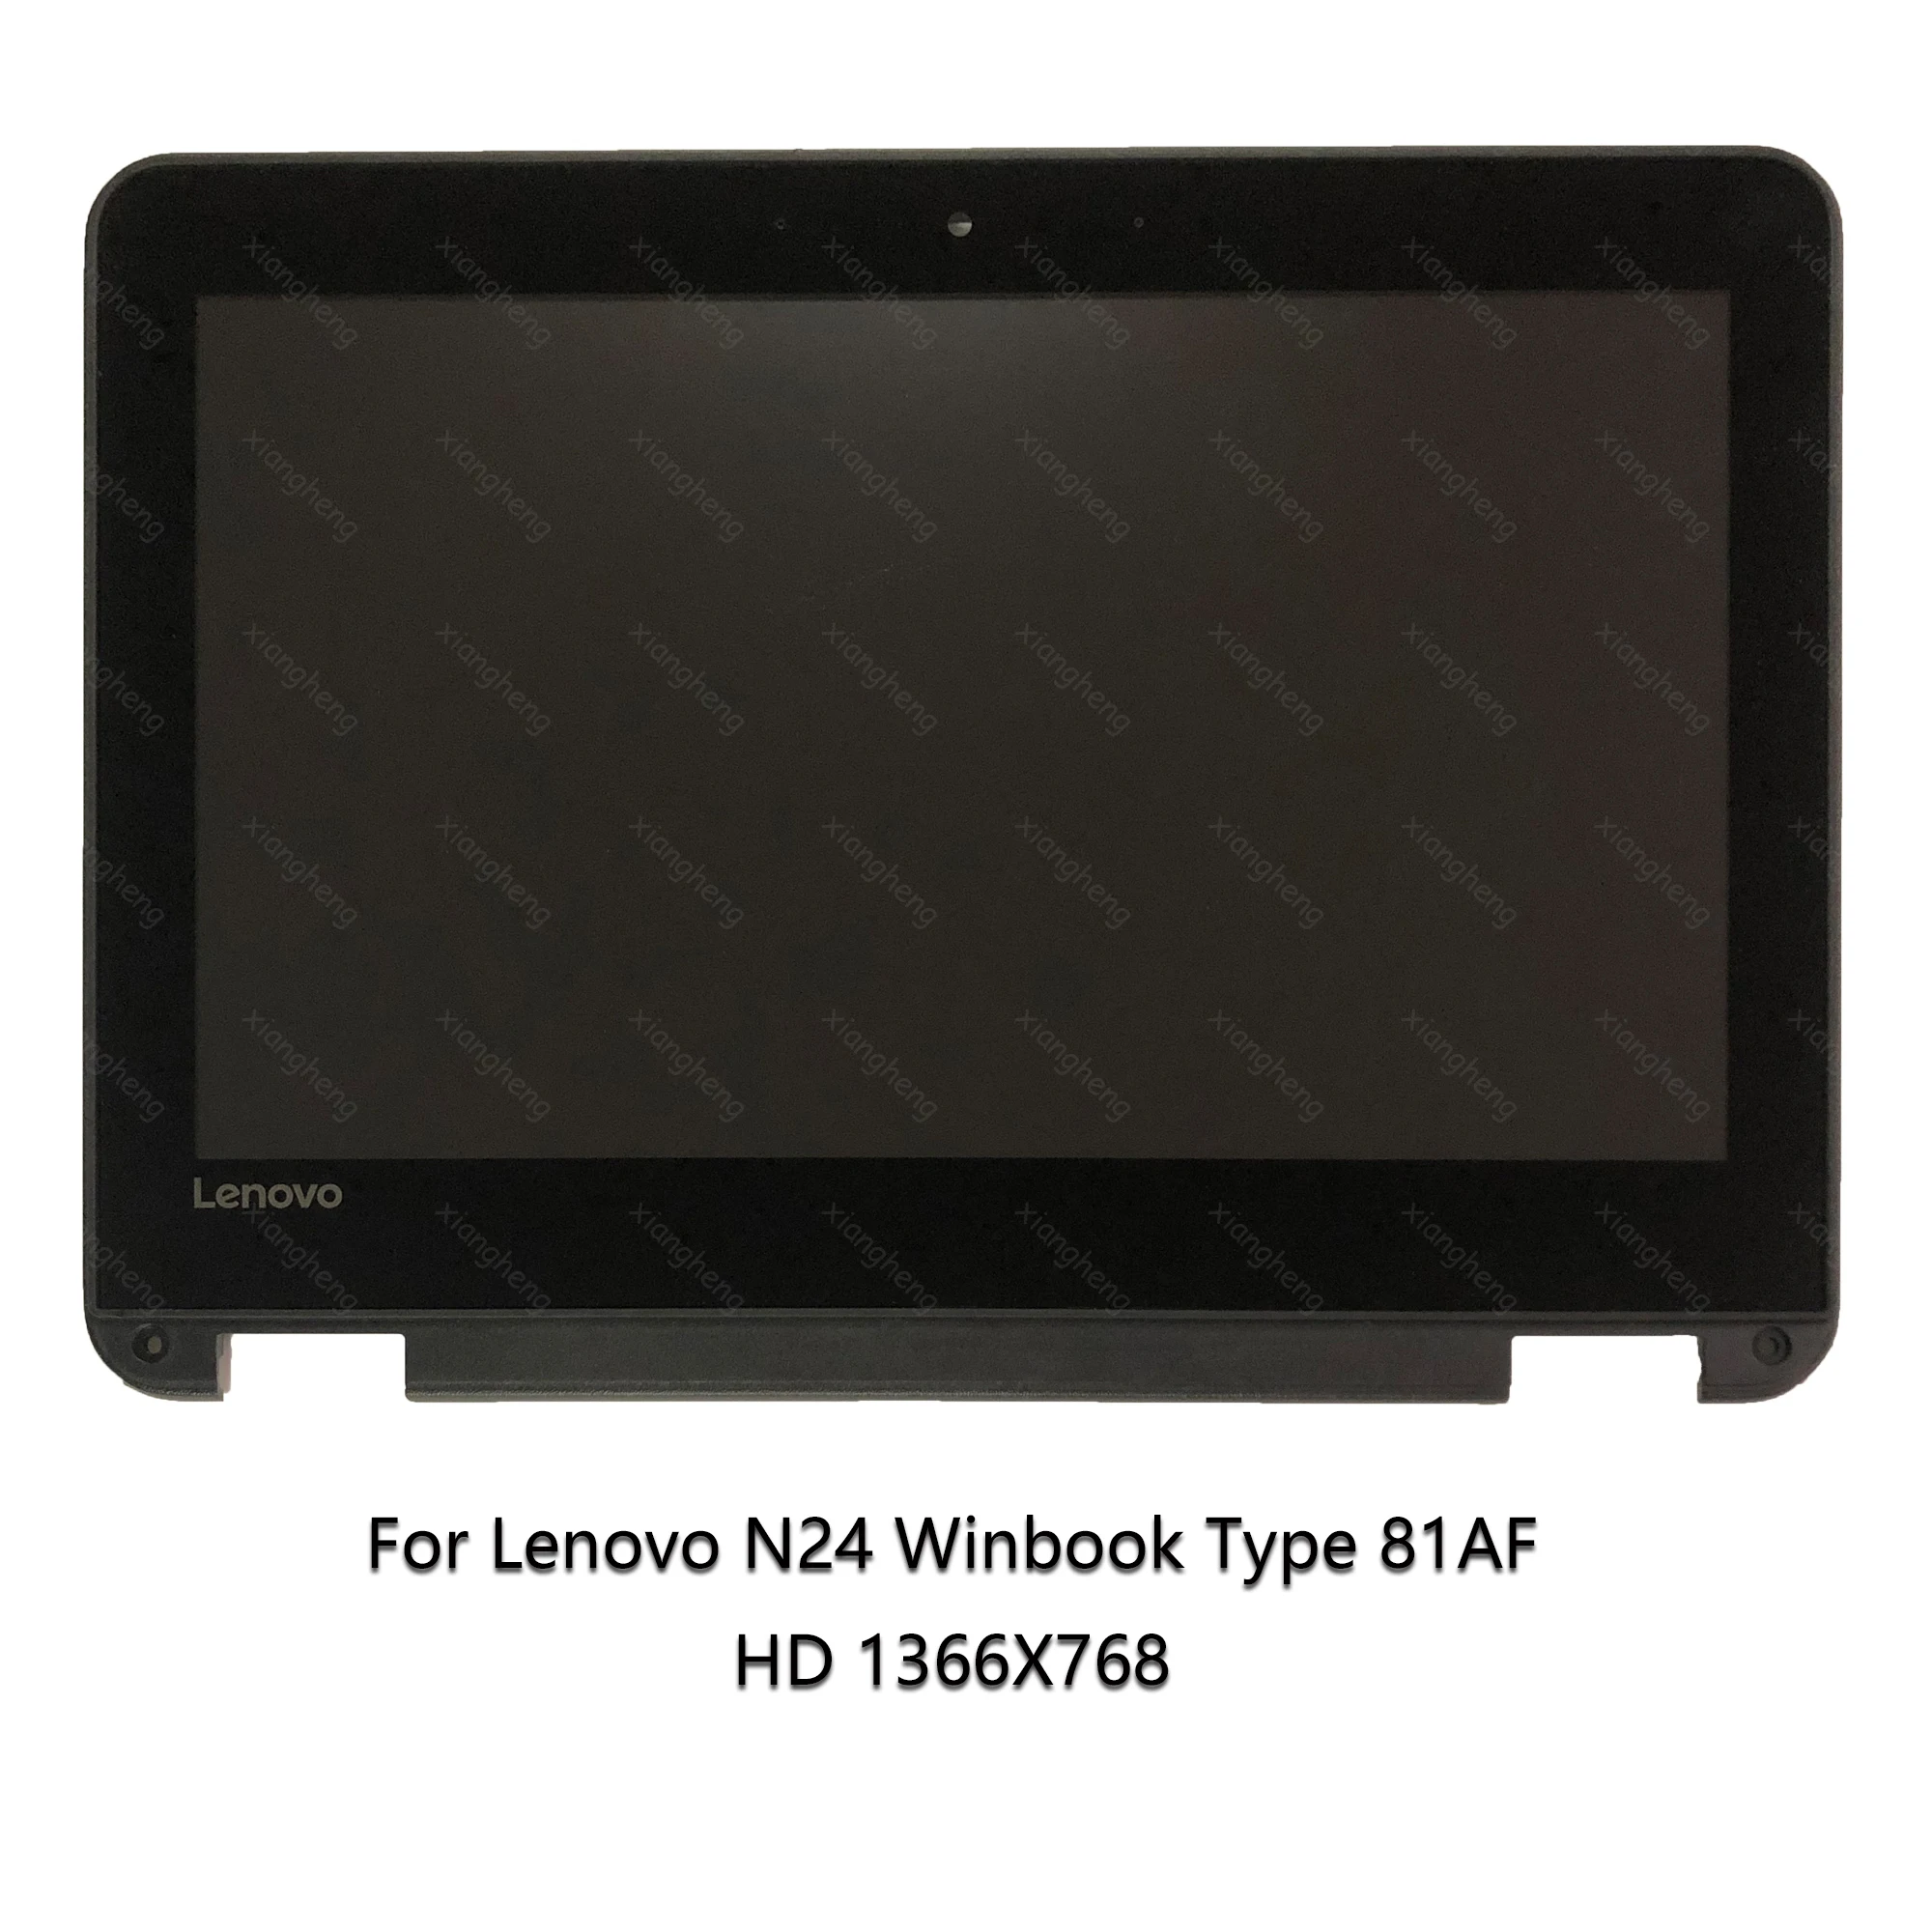 11 6 Hd Lcd Led Touch Screen Digitizer Assembly With Border Nv116whm N45 B116xan04 0 For Lenovo Winbook N24 81af Buy Lcd Digitizer Assembly For Lenovo Winbook N24 81af Lcd Touch Screen Digitizer Replacement